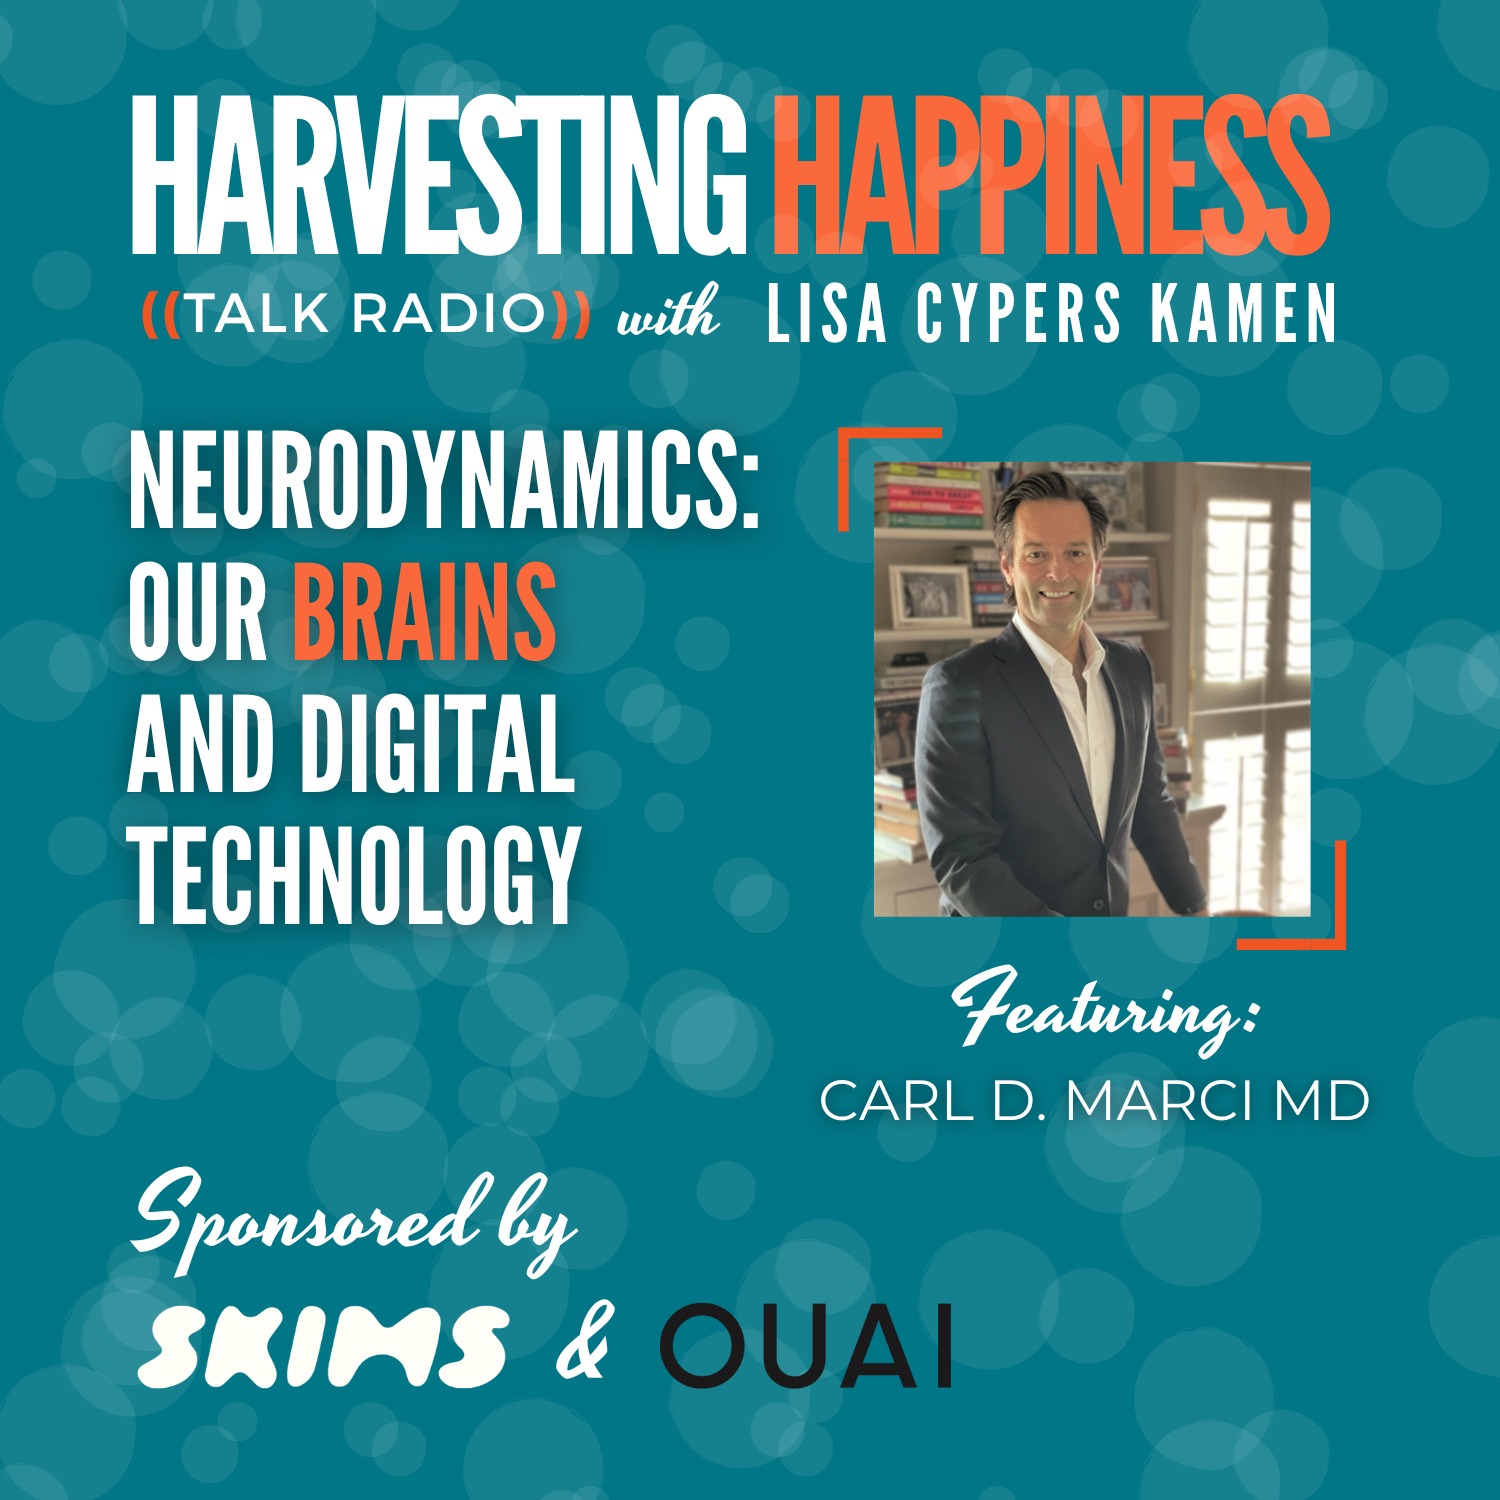 Podcast about our brains and digital technology with Marc Lesser, sponsored by SKIMS and OUAI